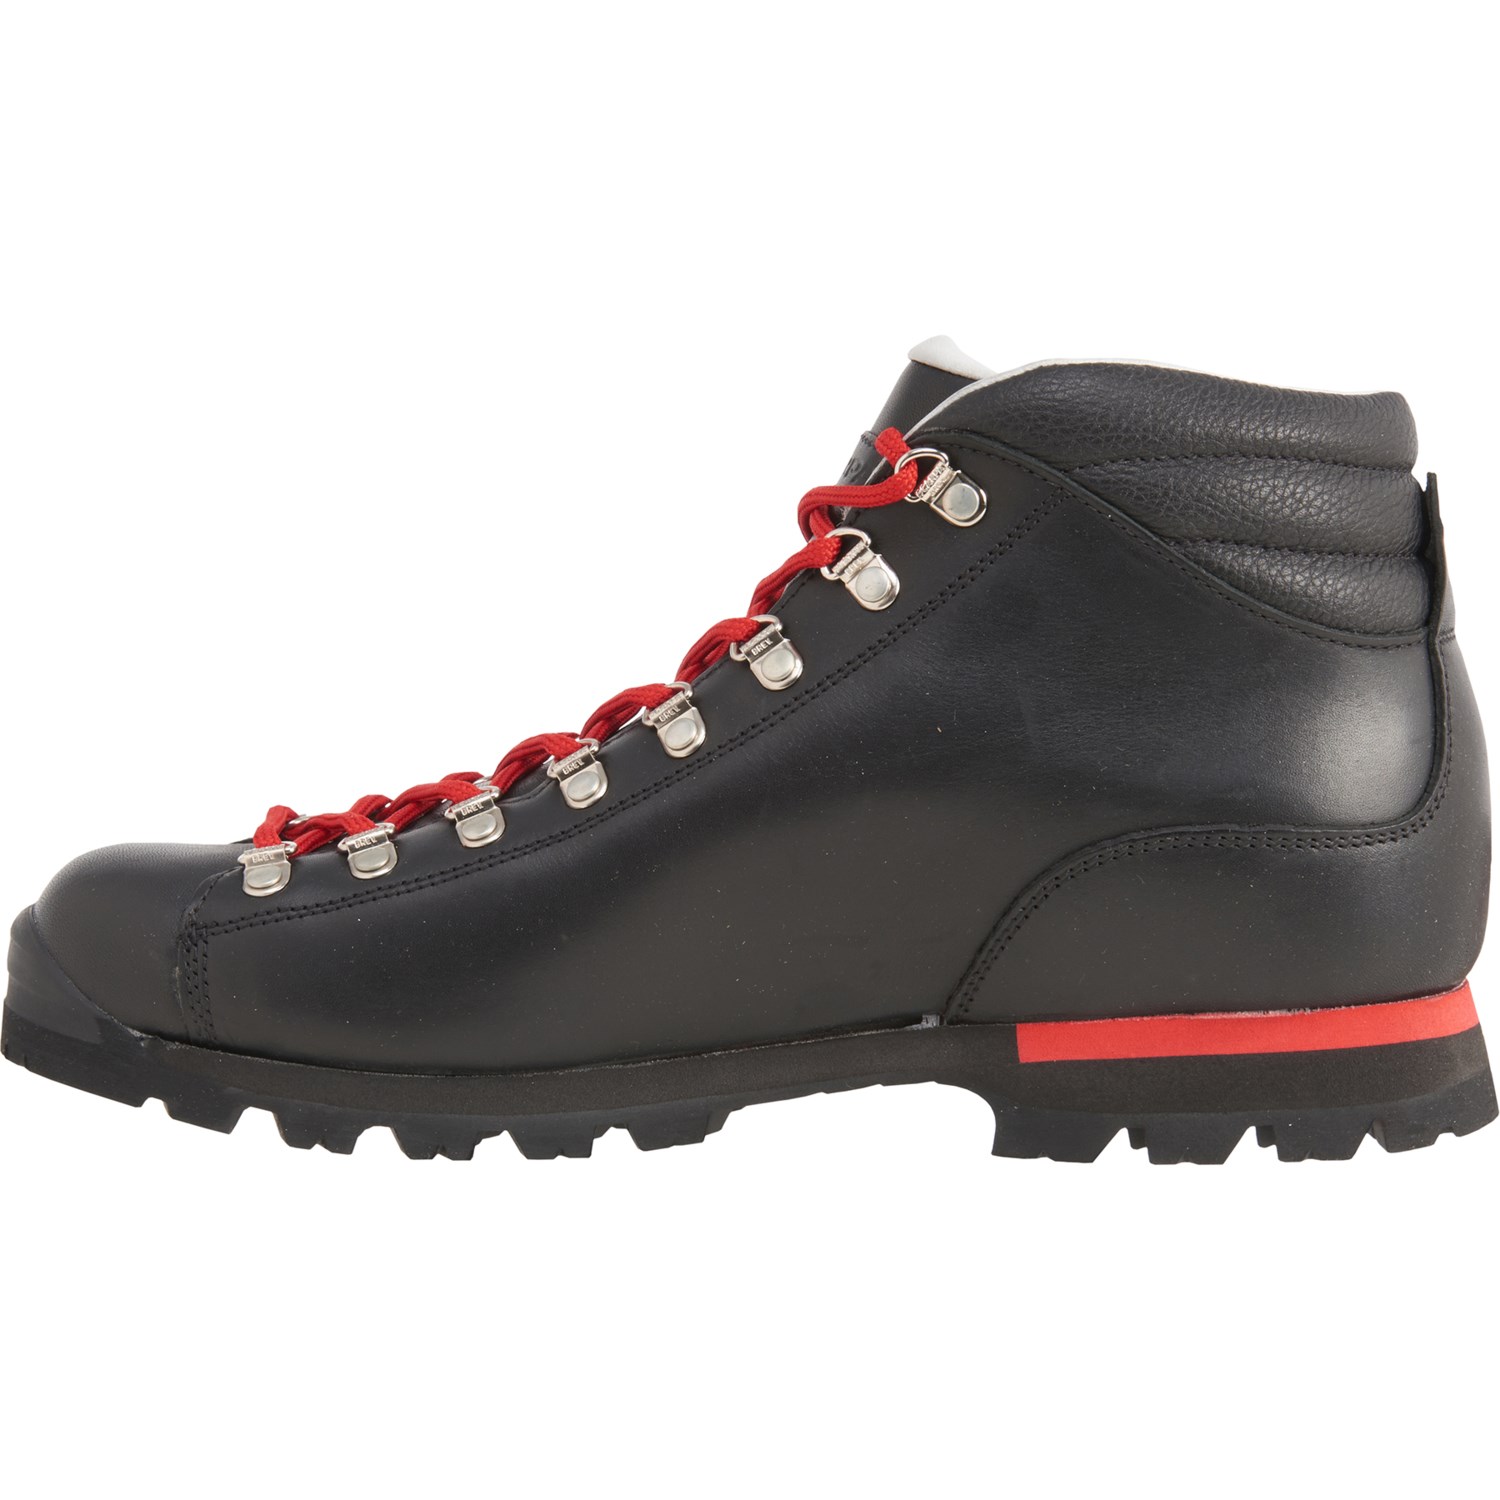 Scarpa Made in Italy Primitive Hiking Boots (For Men) - Save 56%